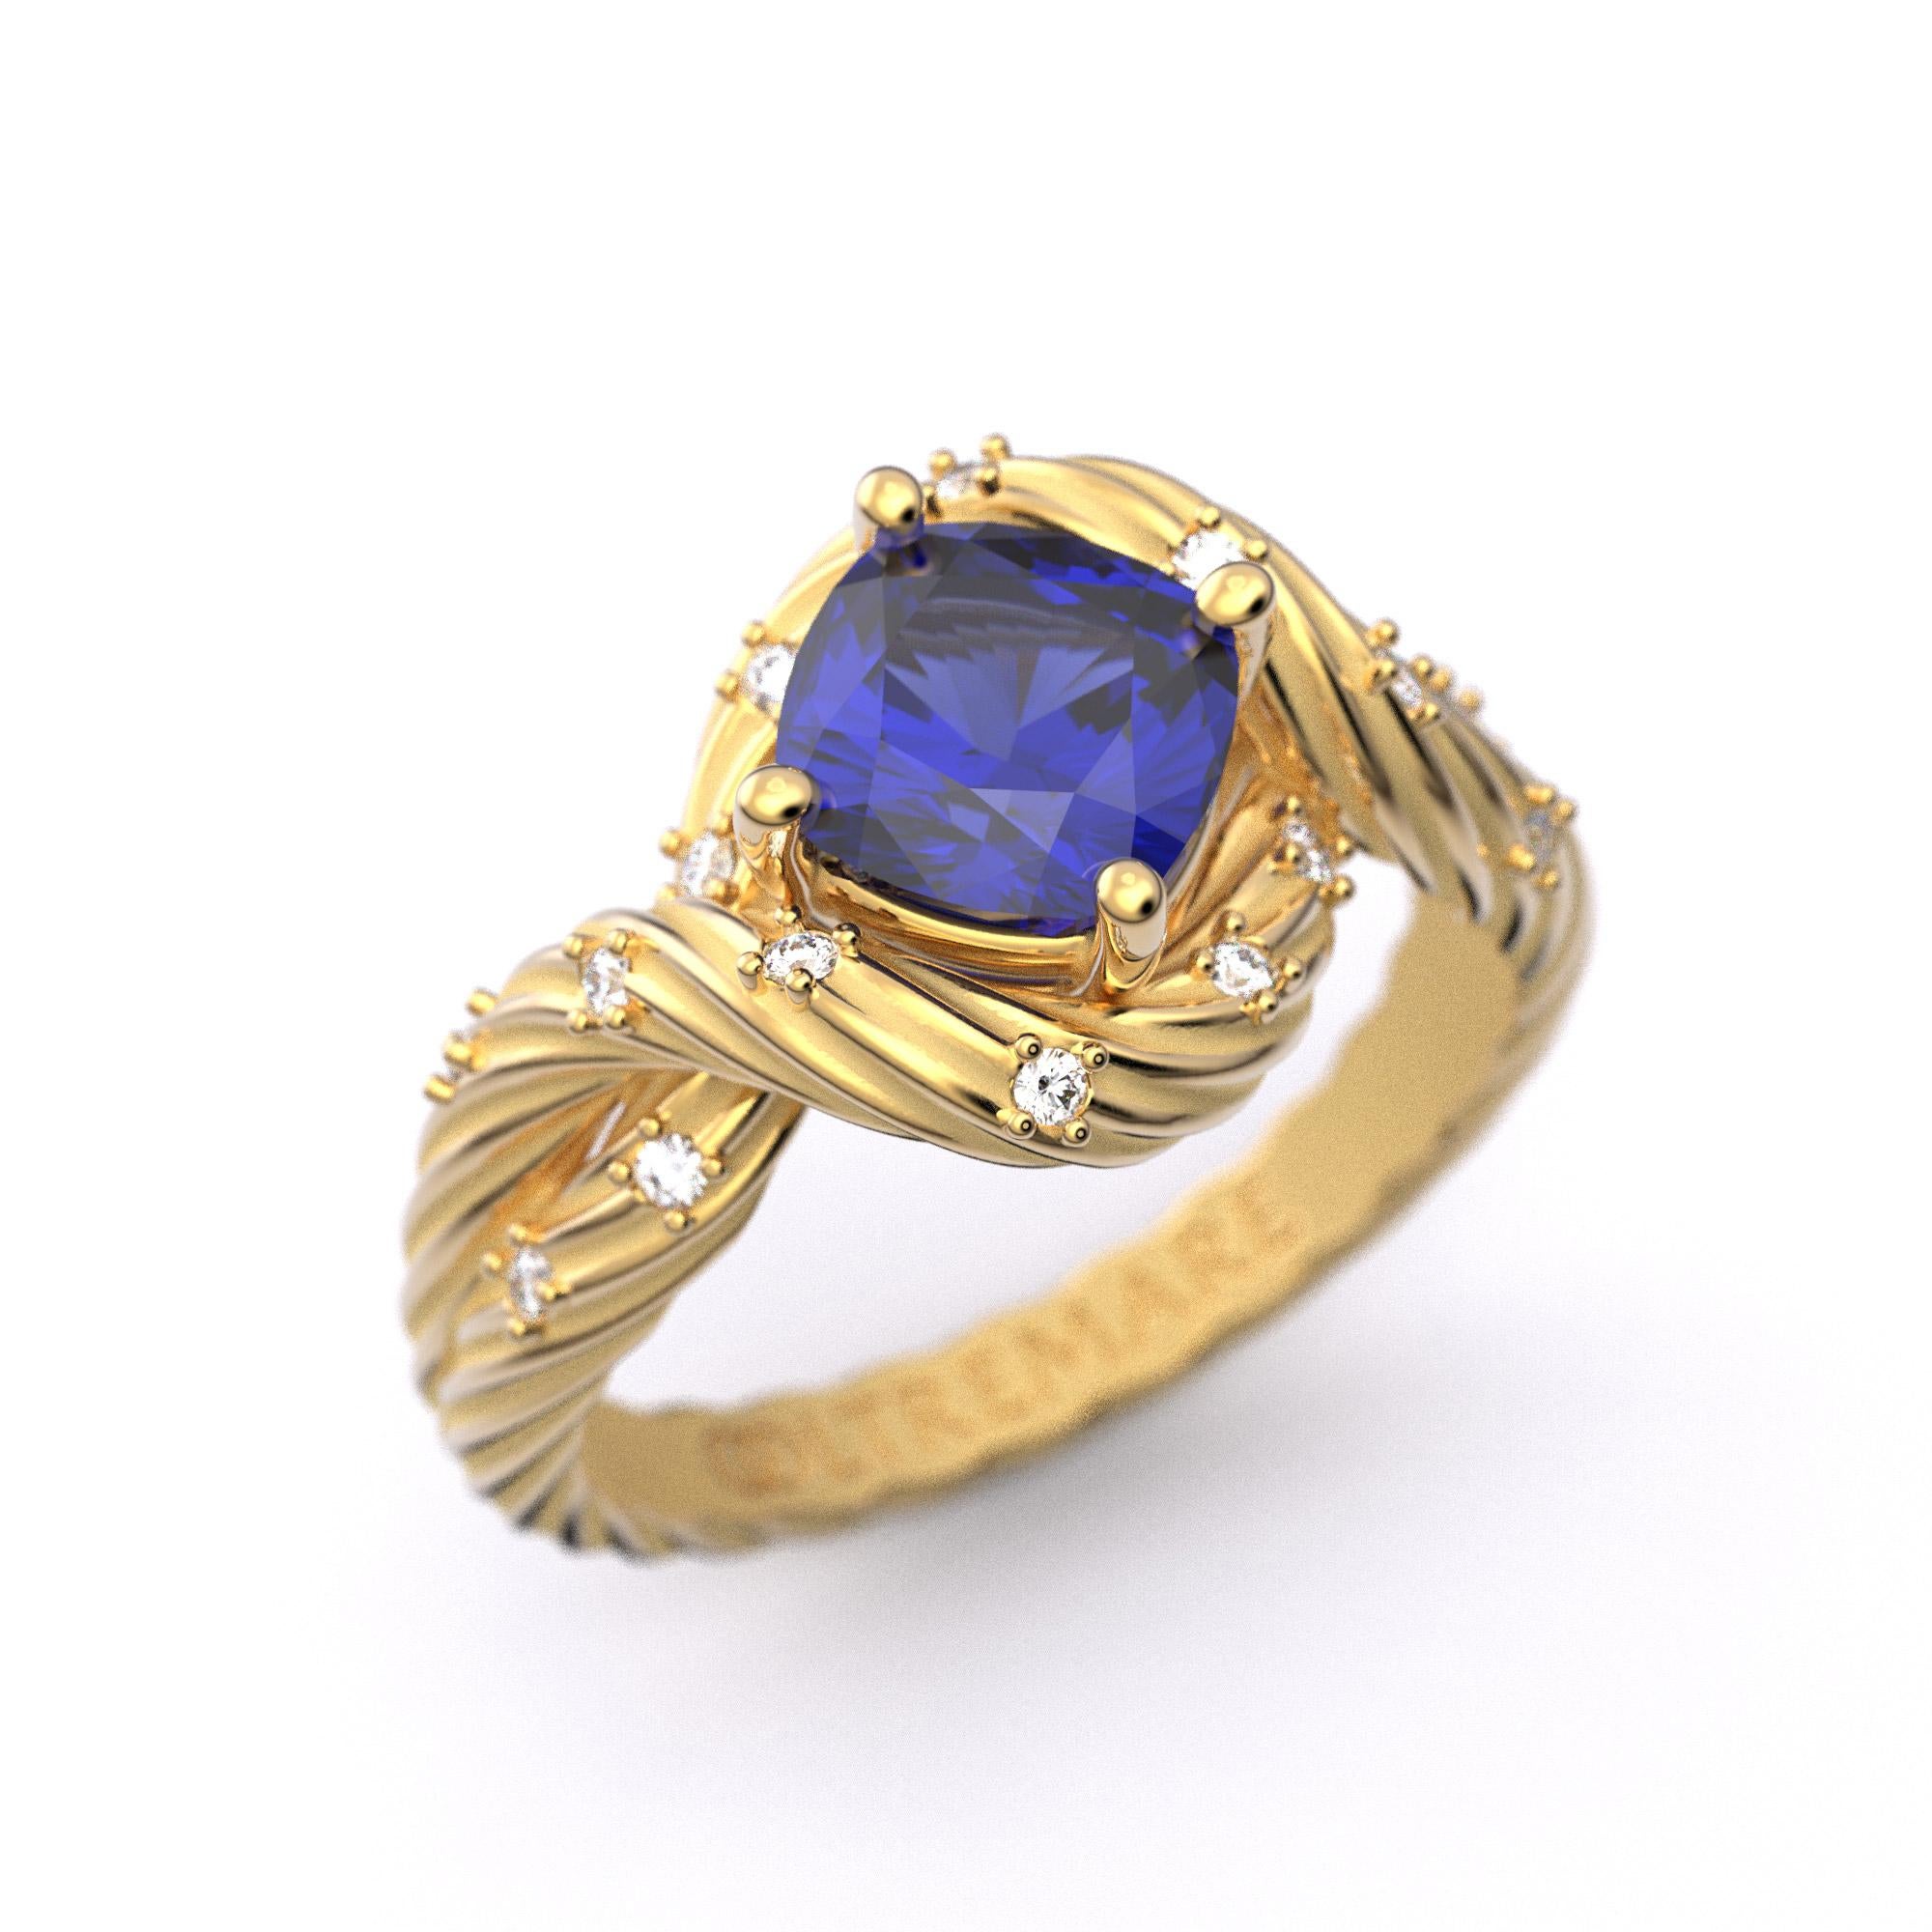 For Sale:  Tanzanite and Diamonds Ring 14k Solid Gold, Italian Fine Jewelry, made to order. 2